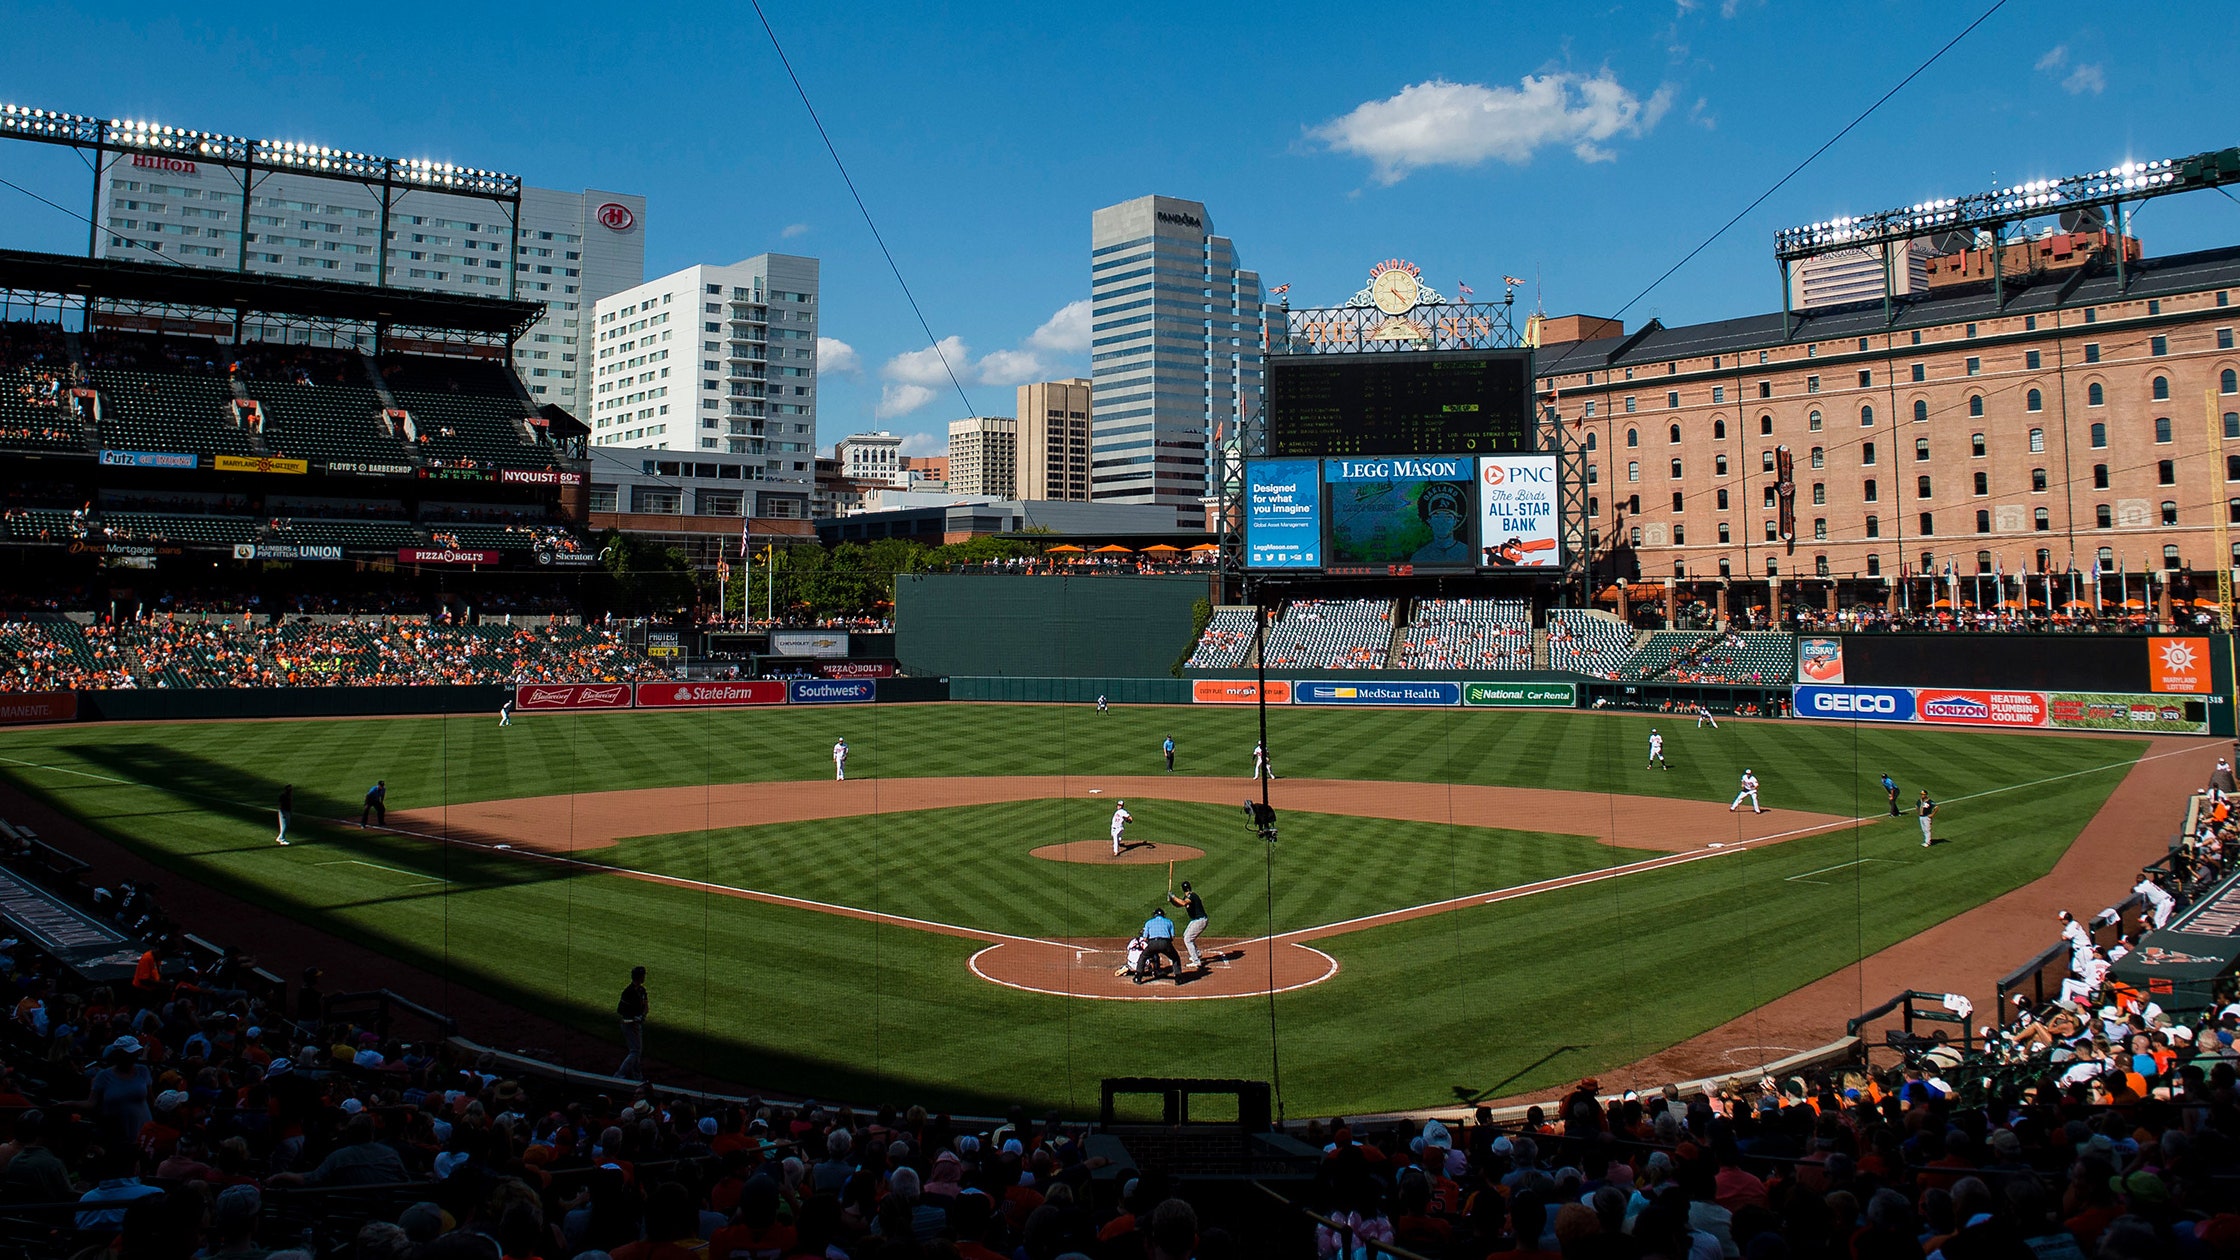 Detroit Tigers vs. Baltimore Orioles: Photos from Camden Yards